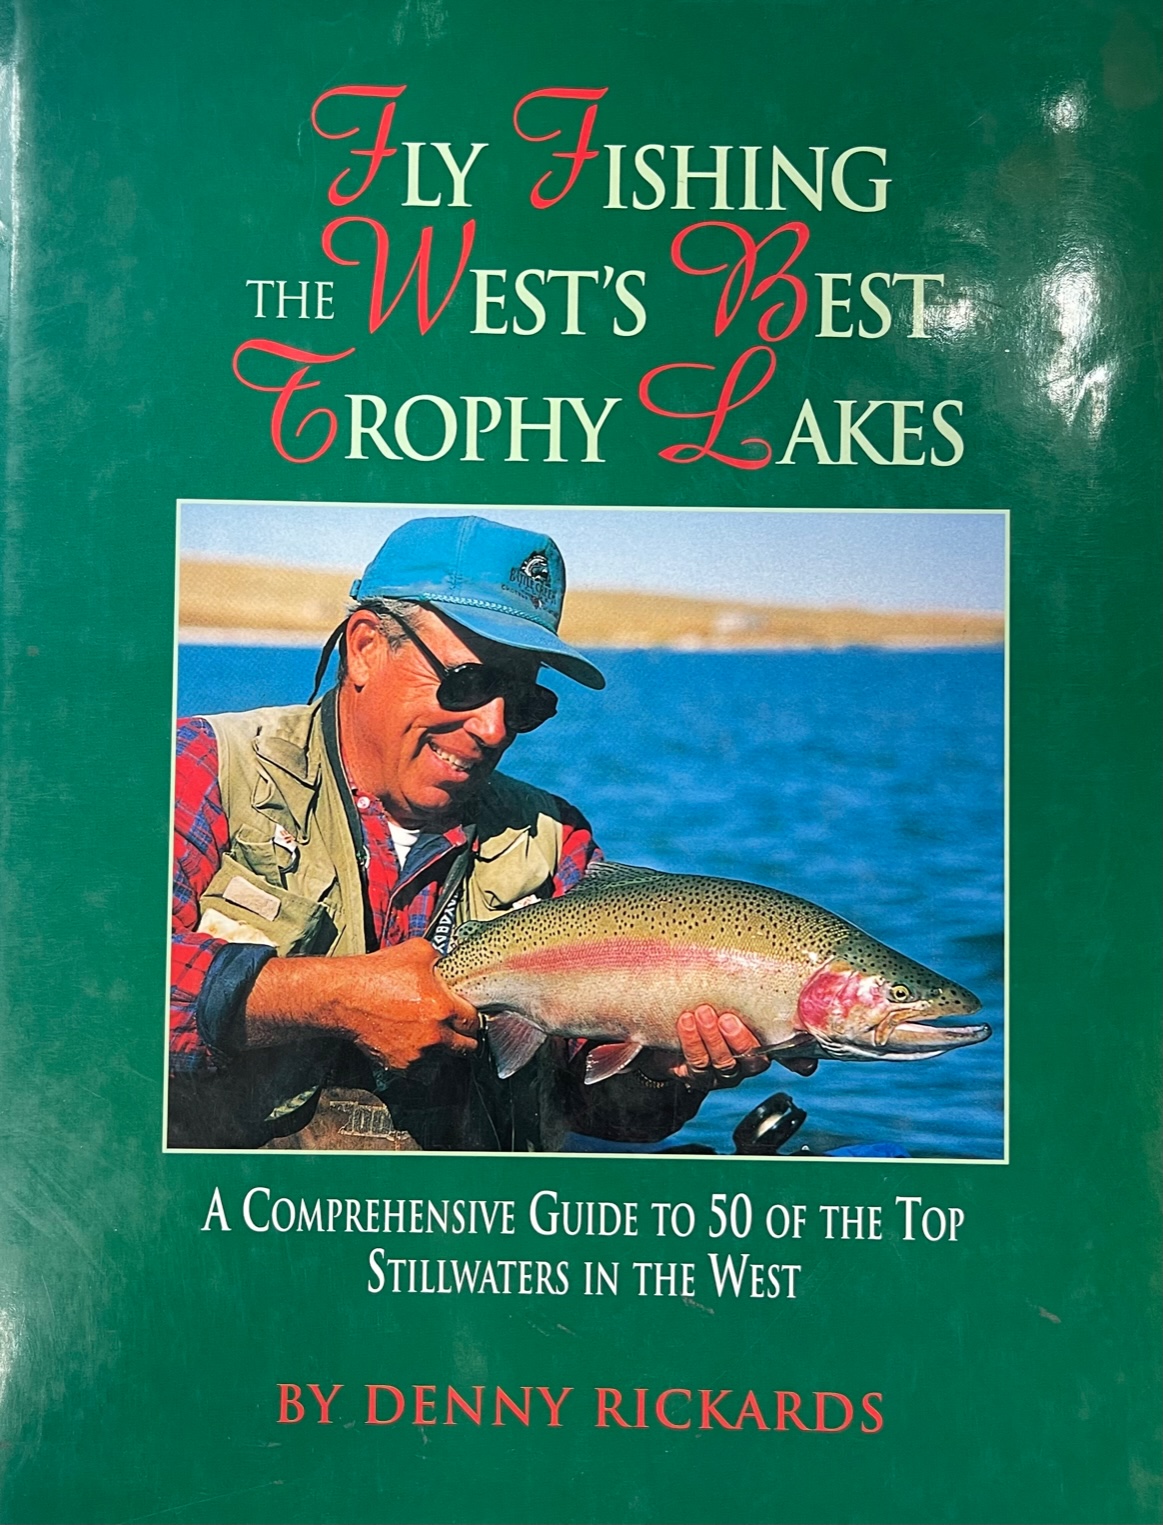 Fly Fishing The West's Best Trophy Lakes - by Denny Rickards